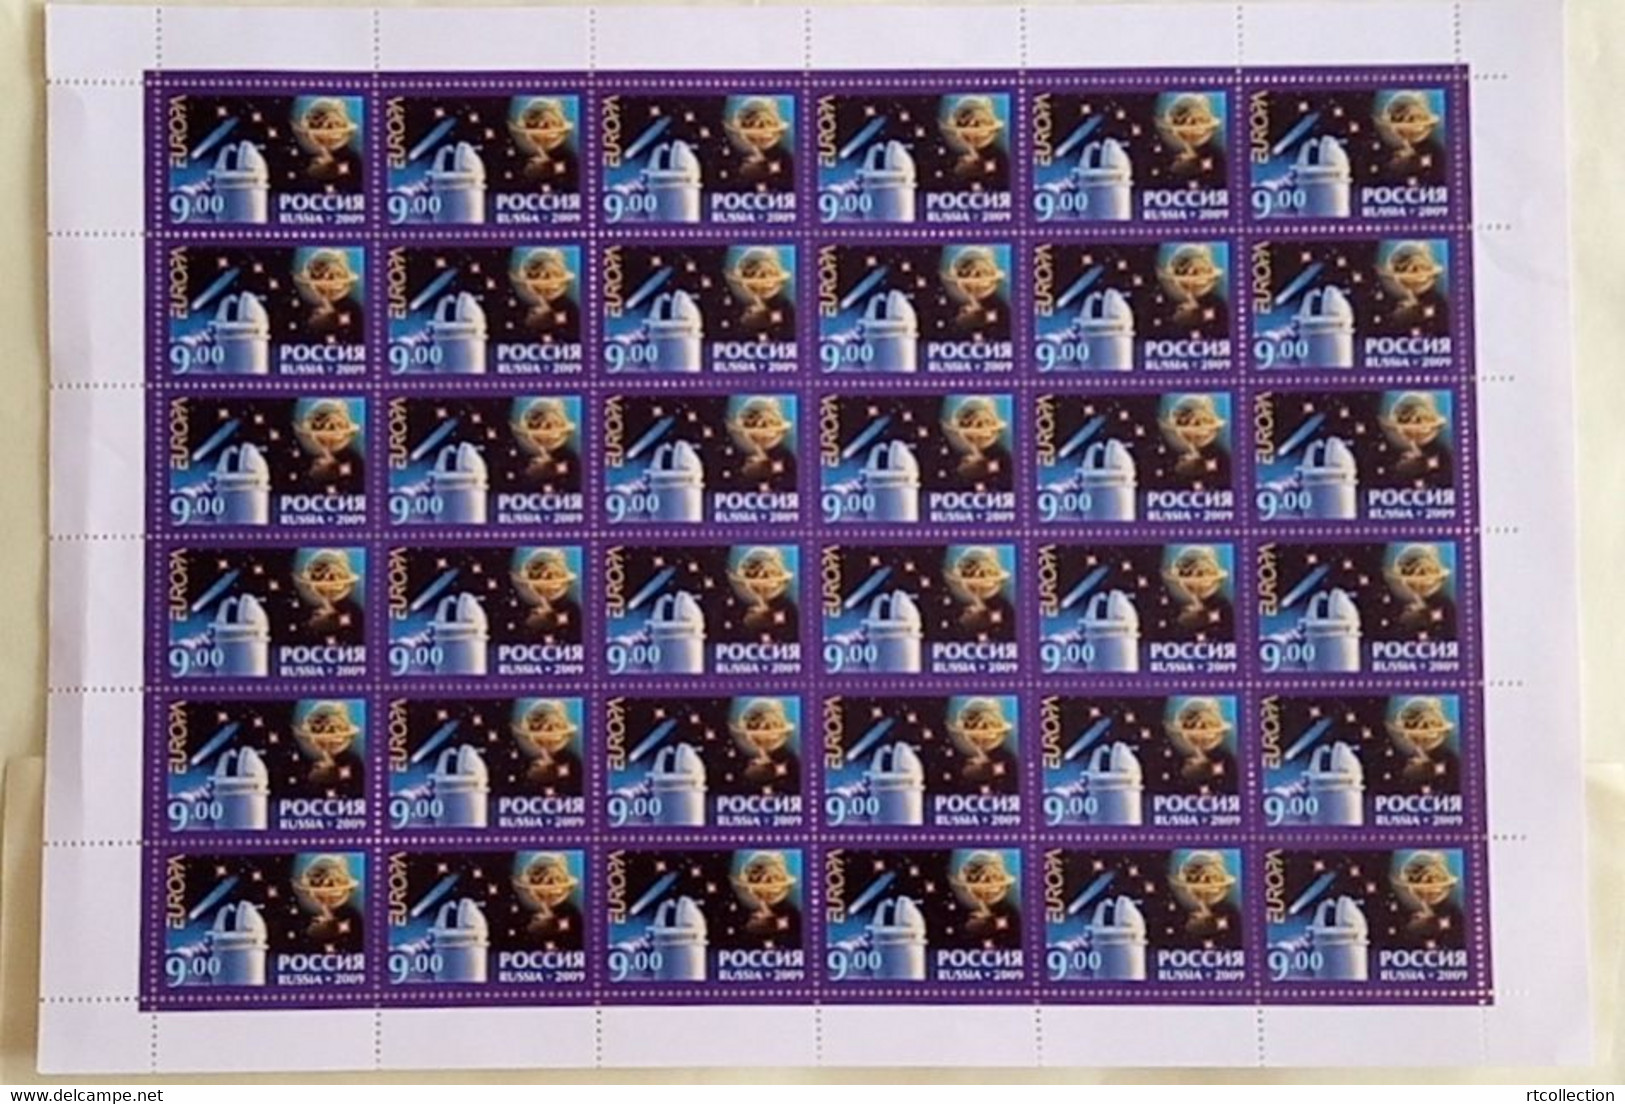 Russia 2009 Sheet Issue By Program Europe Europa-CEPT Europa Sciences Astronomy Space Telescope Stamps Edge Folded - Fogli Completi